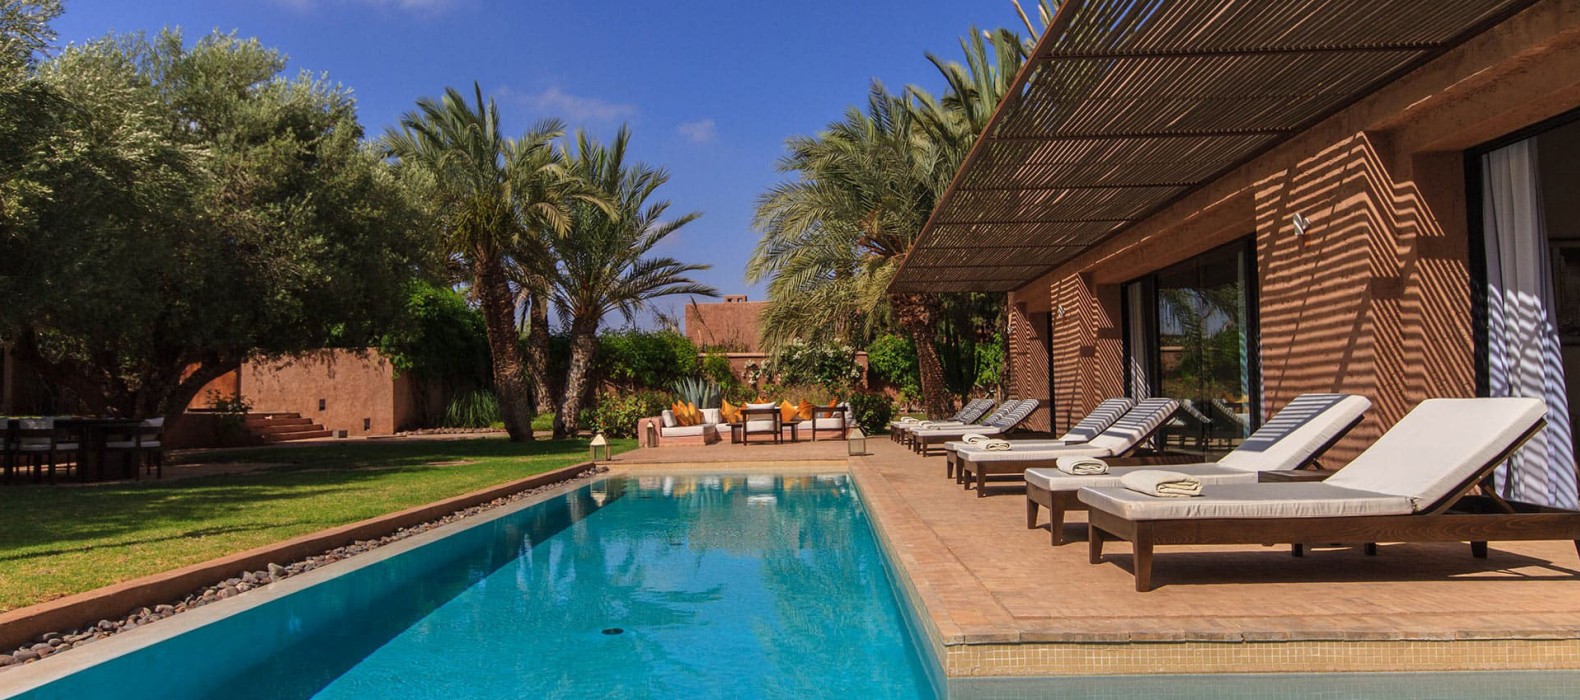 Pool area view of Villa Amourine in Marrakech